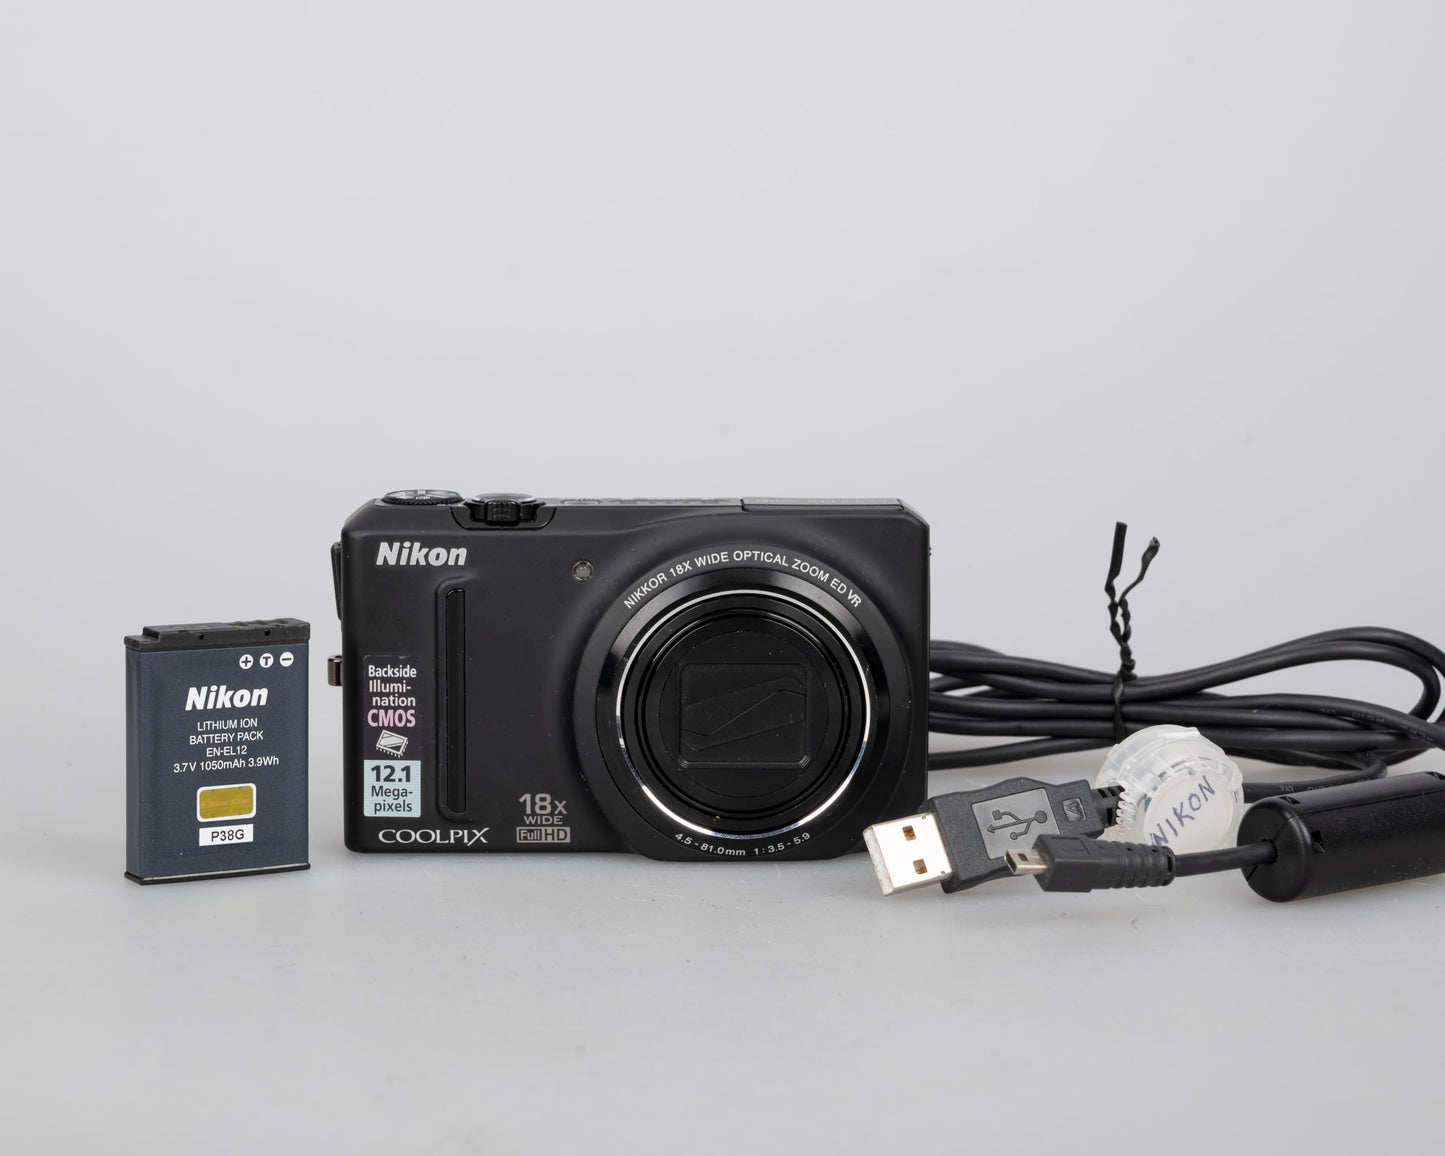 Nikon Coolpix S9100 12.1 MP digicam w/ battery + USB charge cable (uses SD cards)